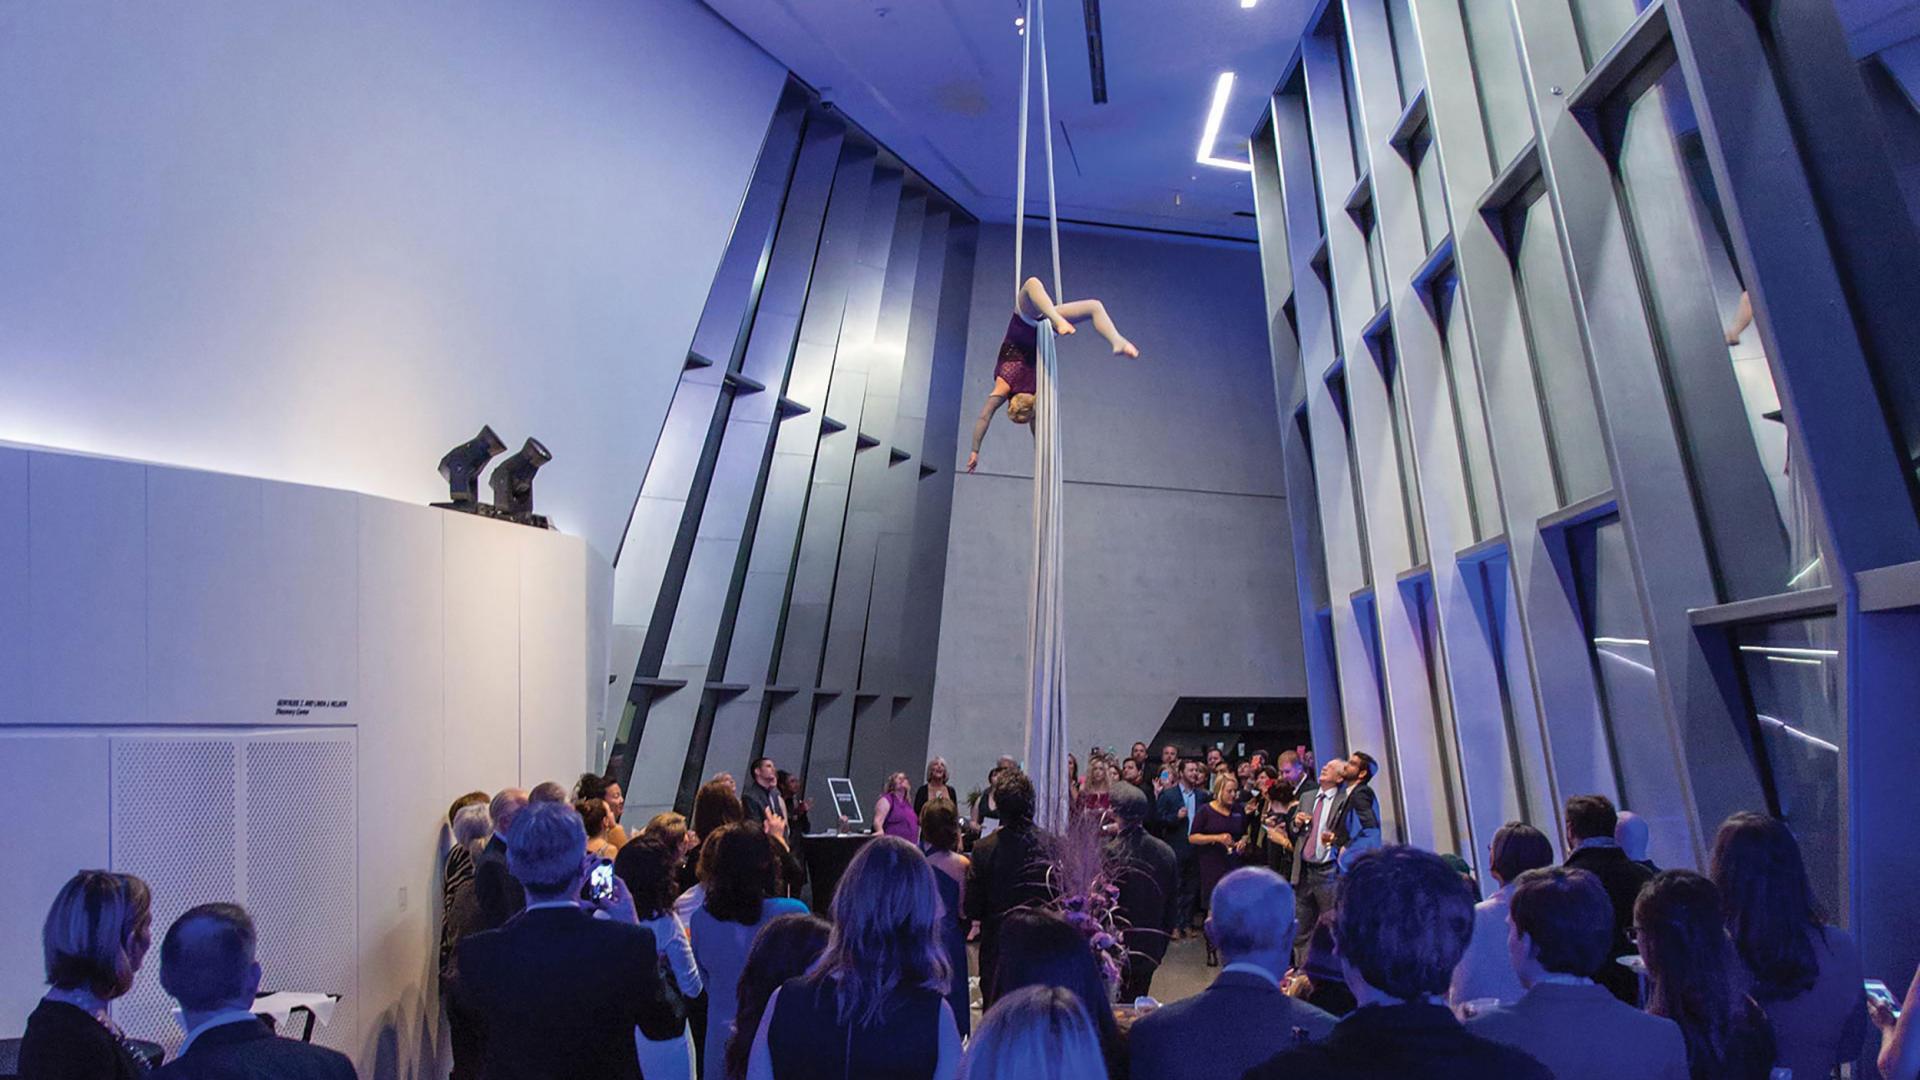 Crowd watching an aerialist perform